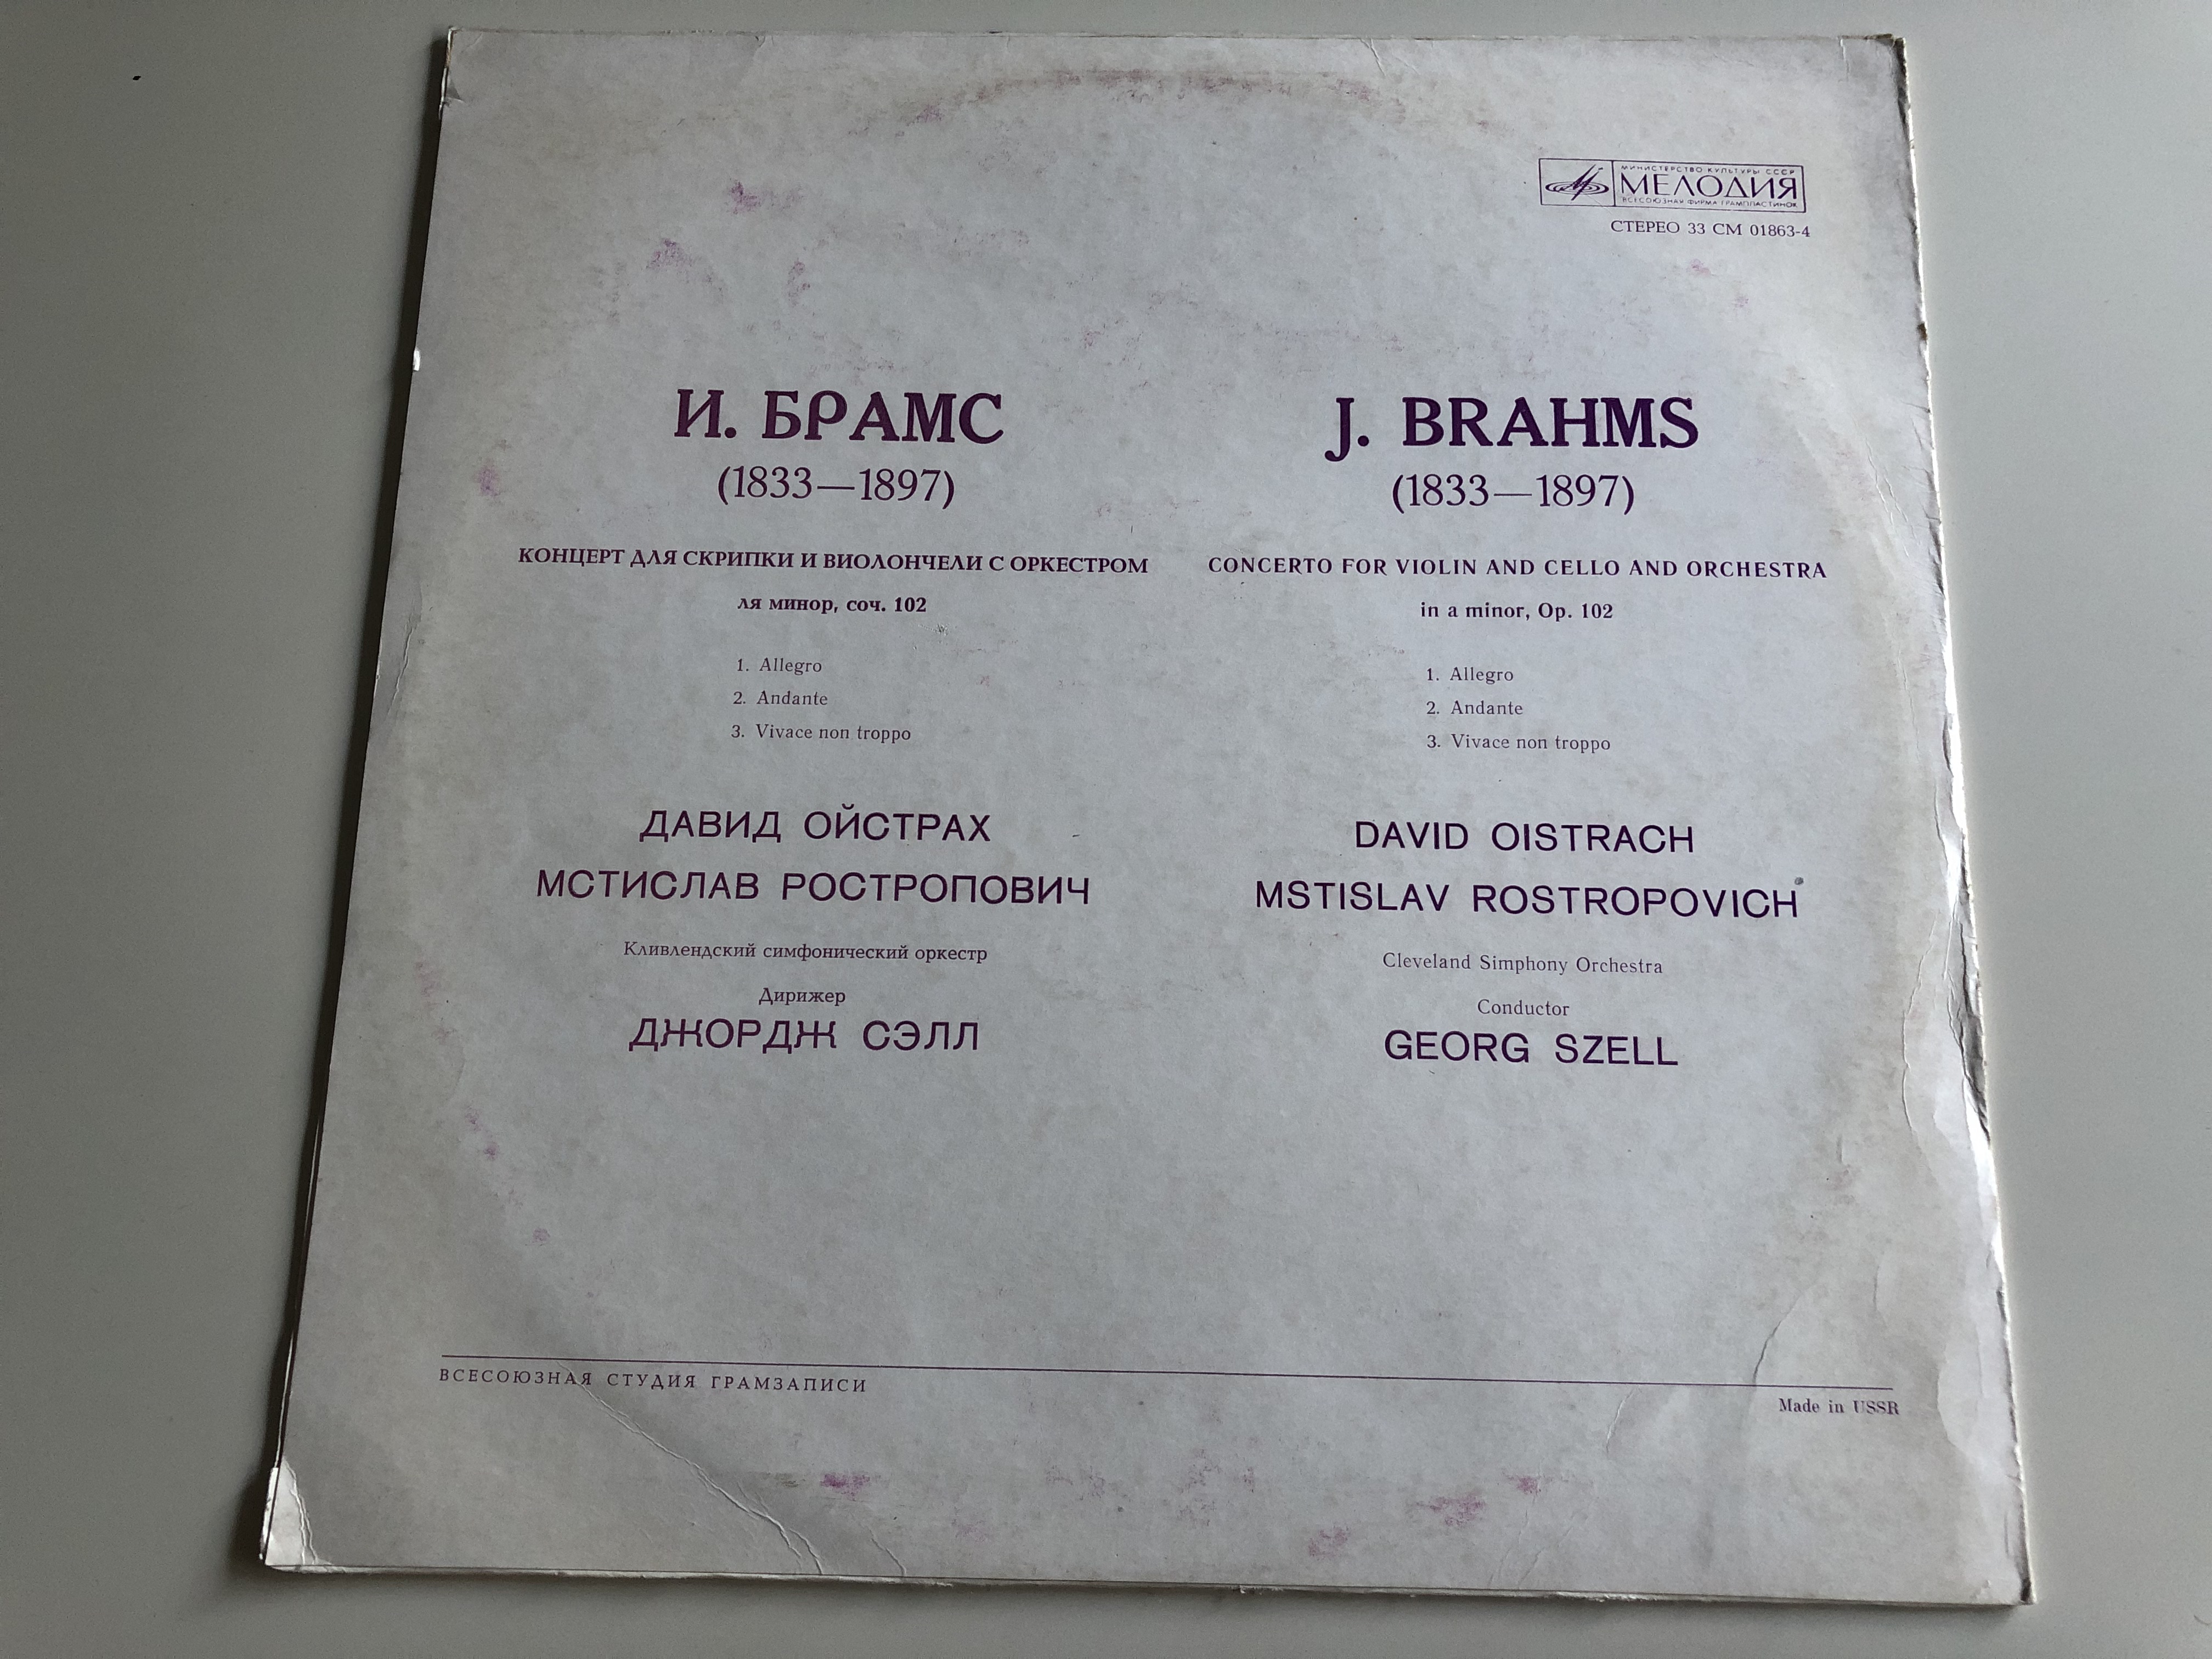 j.-brahms-concerto-for-violin-and-cello-and-orchestra-in-a-minor-op.-102-david-oistrakh-mstislav-rostropovich-cleveland-symphony-orchestra-conductor-george-szell-lp-stereo-33cm-3-.jpg